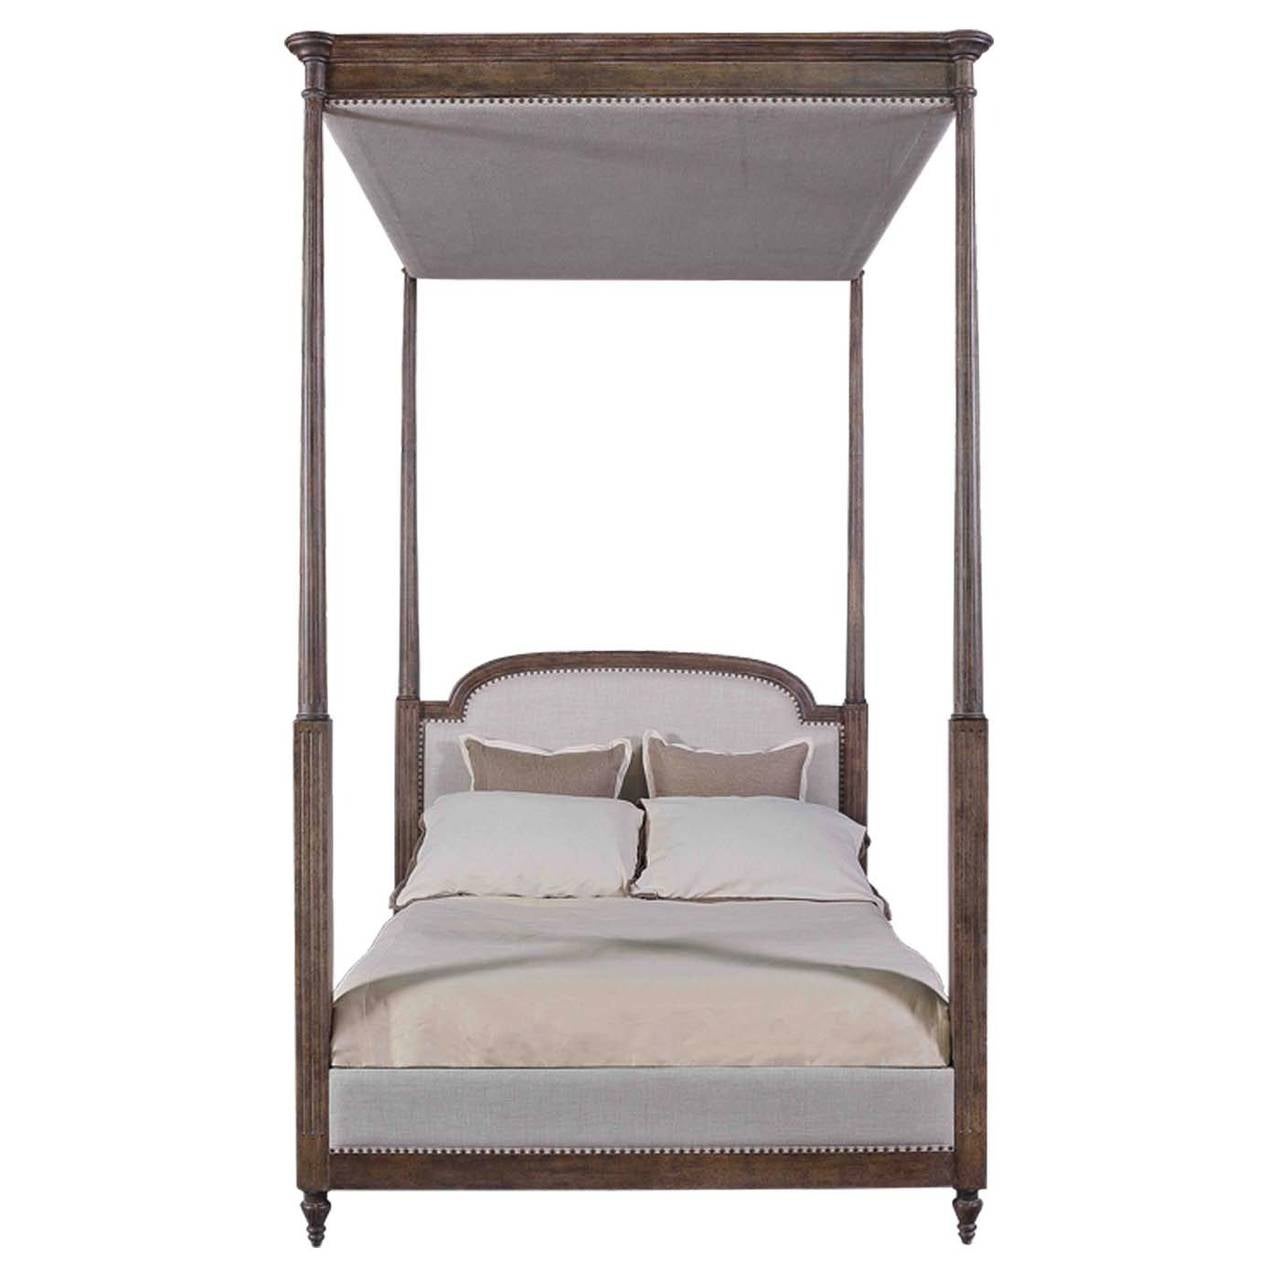 Louis XVI Style Canopy Bed Frame in Elm. What's the saying higher the canopy the close to heaven. This bed reaches new heights, its the added drama for any room with height. This bed is designed for use with both Mattress and Box-SpringsFinished in